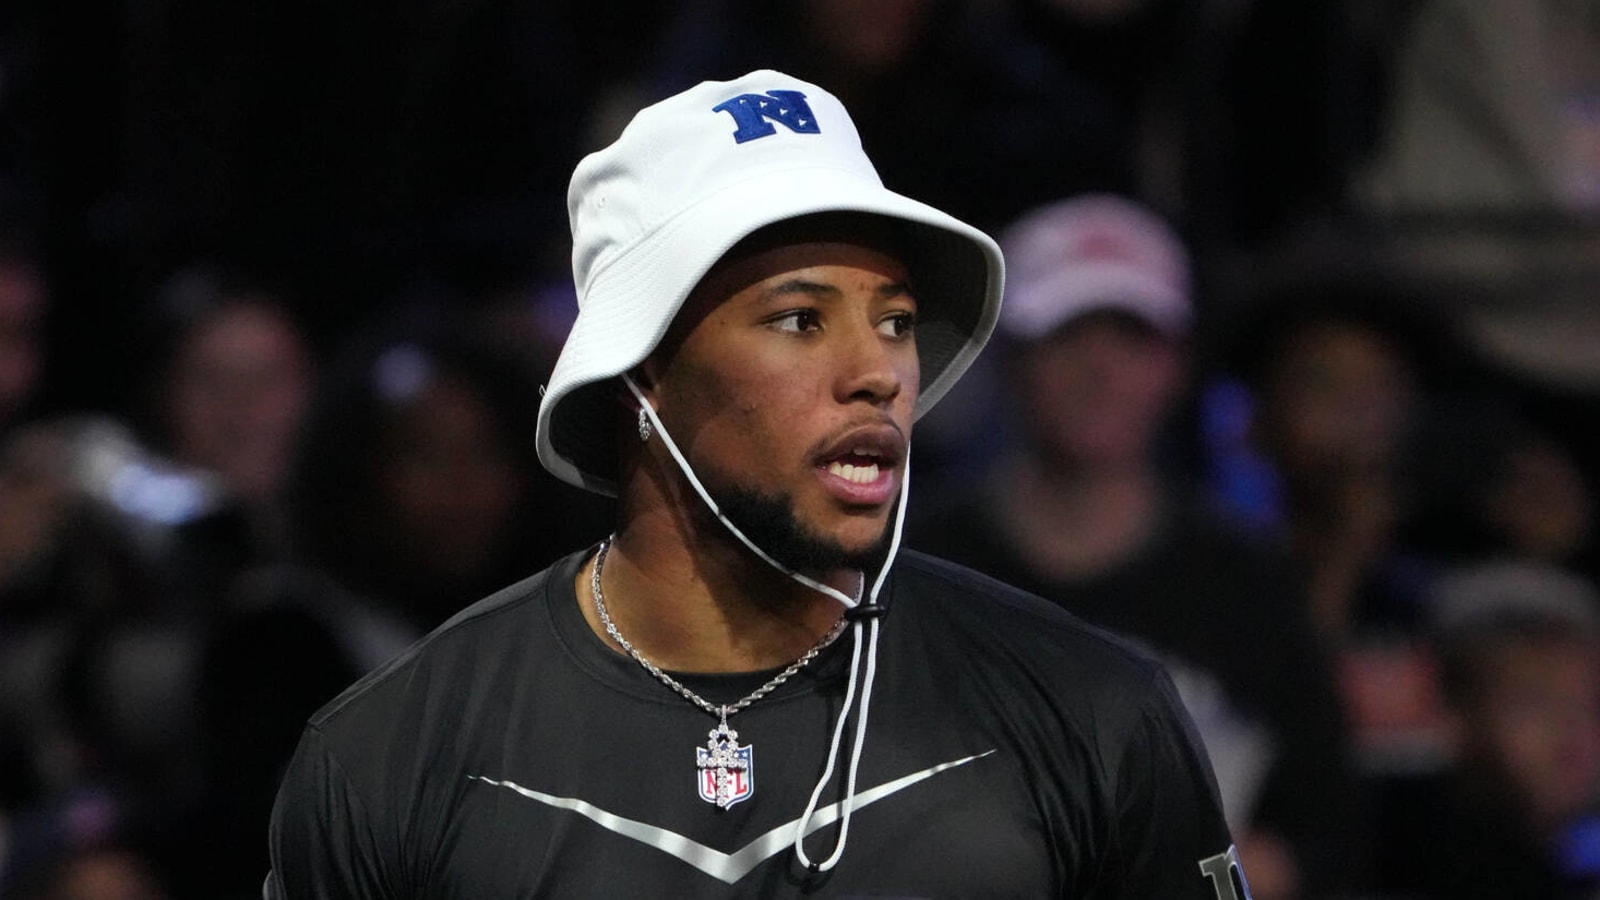 Giants' Saquon Barkley addresses possibly skipping games